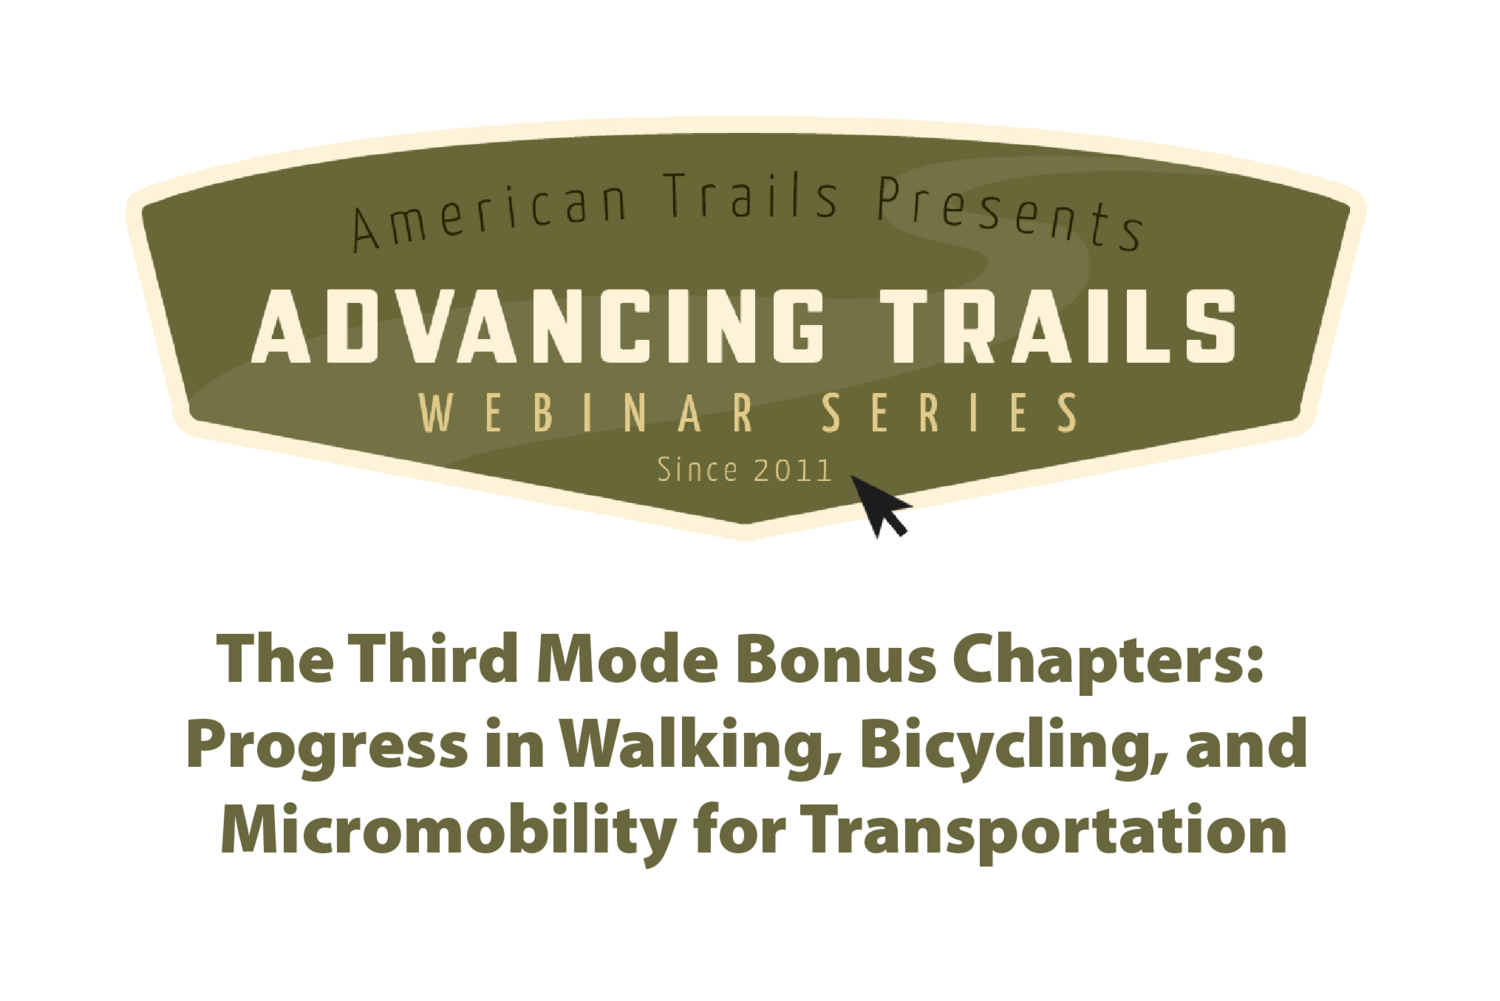 The Third Mode Bonus Chapters: Progress in Walking, Bicycling, and Micromobility for Transportation (RECORDING)